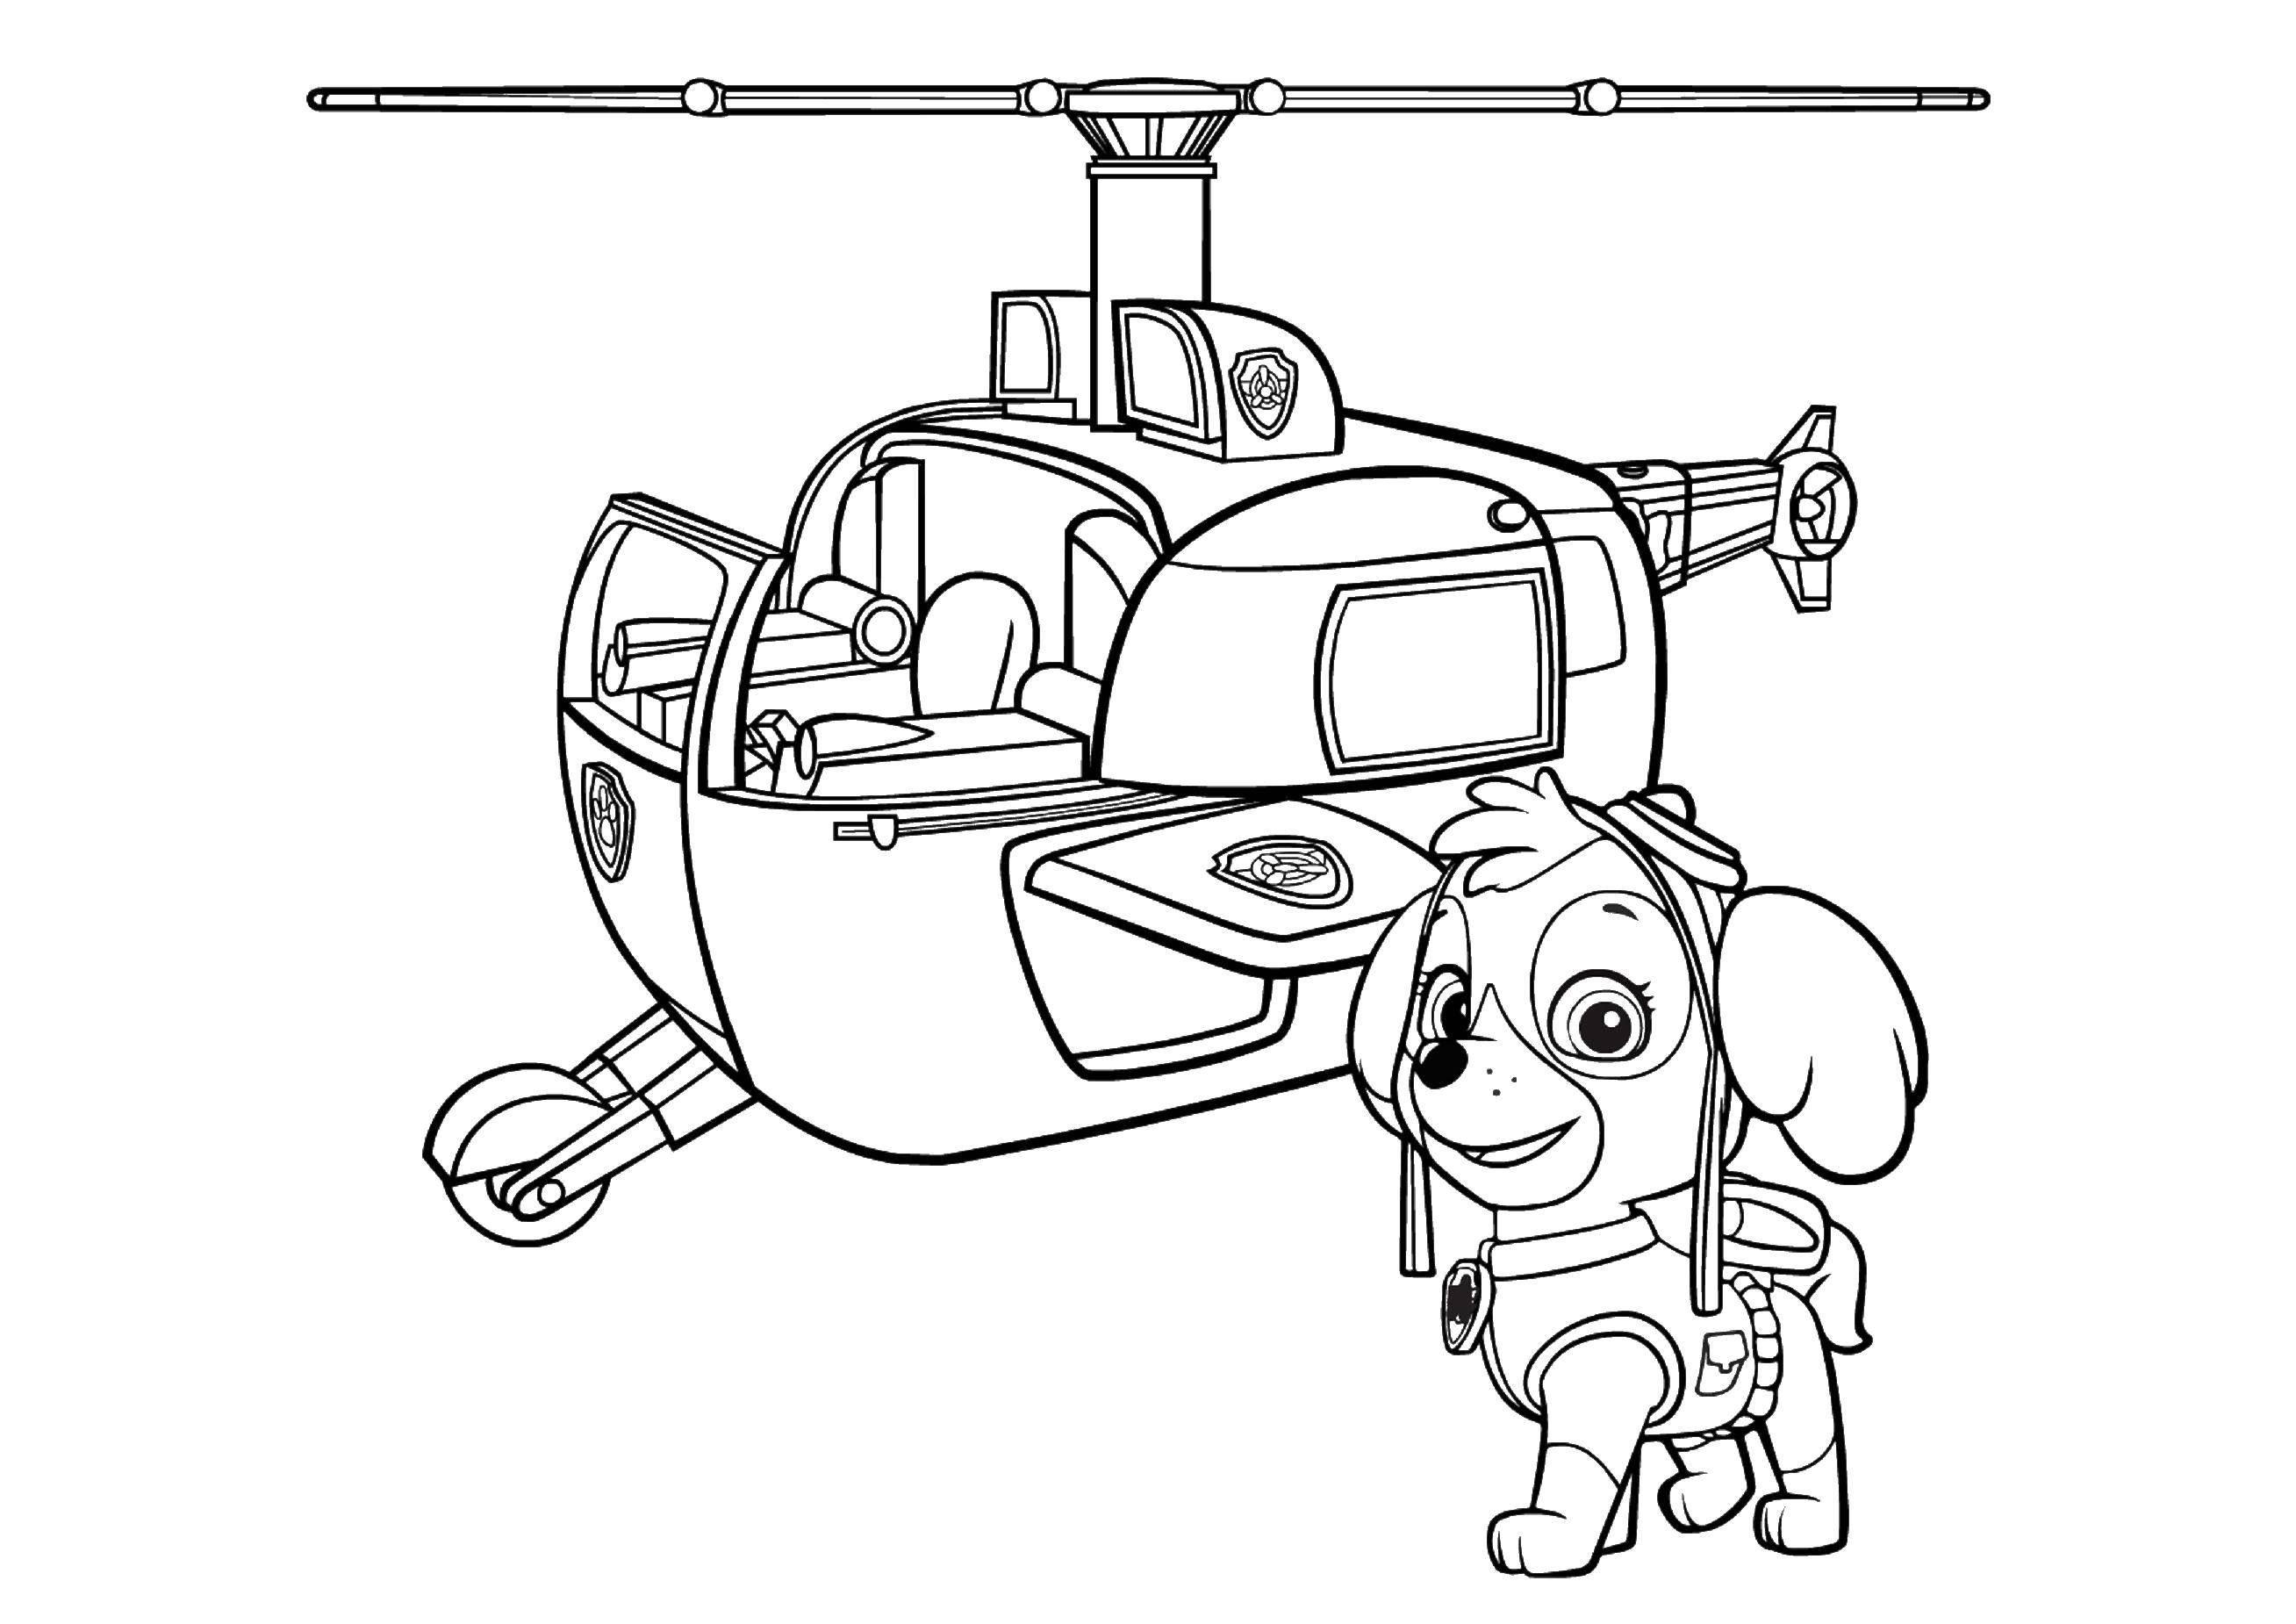 Coloring Skye the Cockapoo puppy moves on a pink helicopter. Category paw patrol. Tags:  Skye, paw patrol.